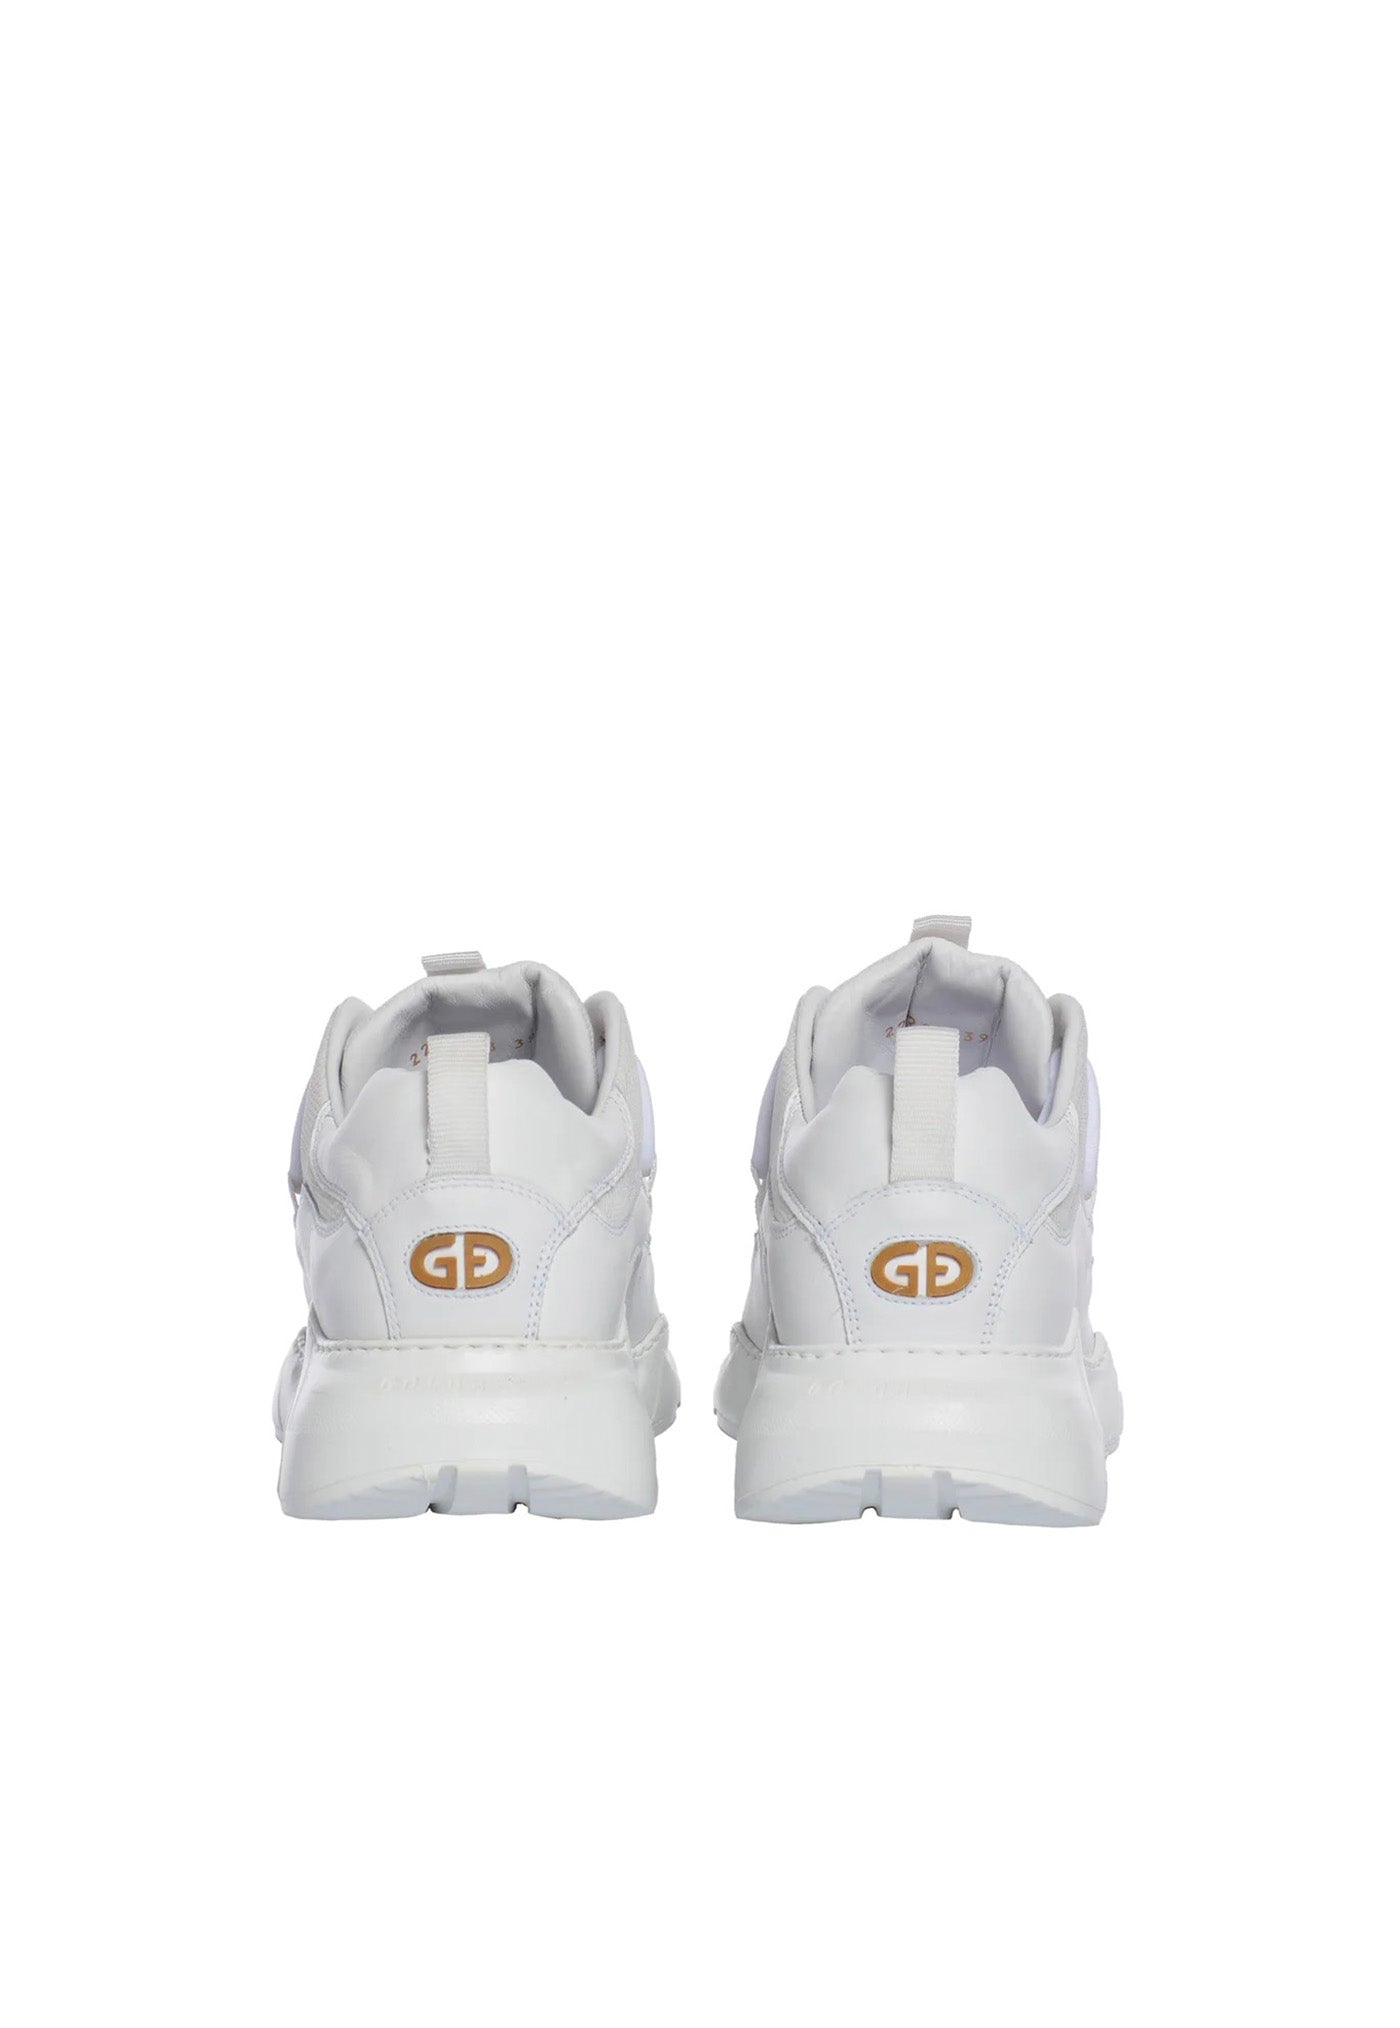 Getty Sneakers - White sold by Angel Divine